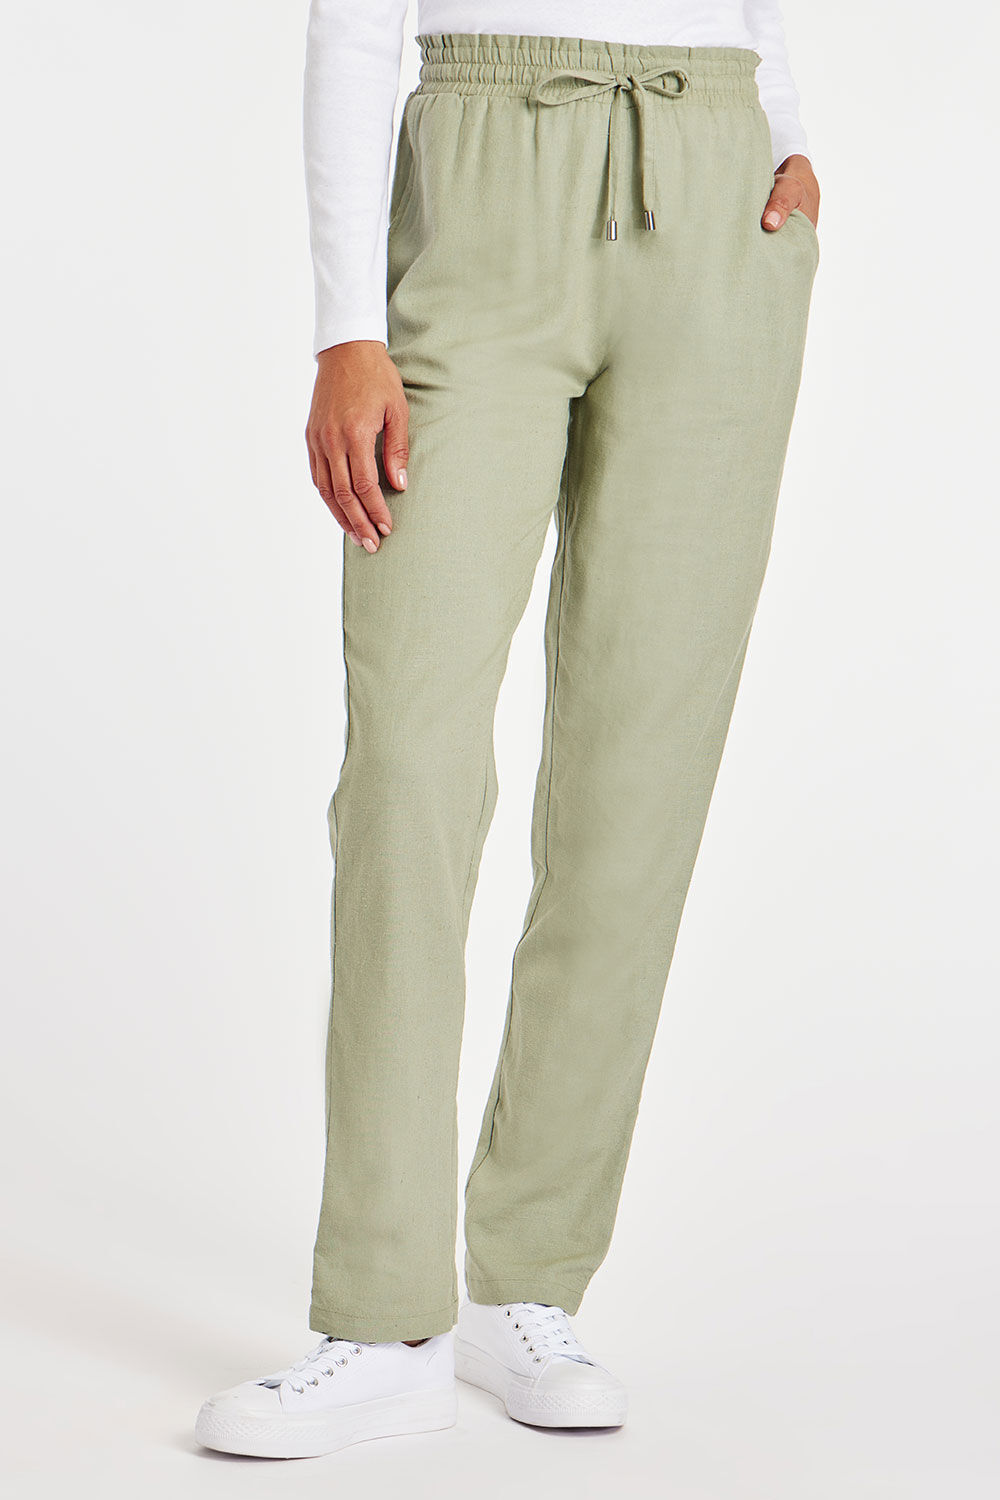 Bonmarche Sage Paperbag Tie Waist Tapered Linen Trousers, Size: 10